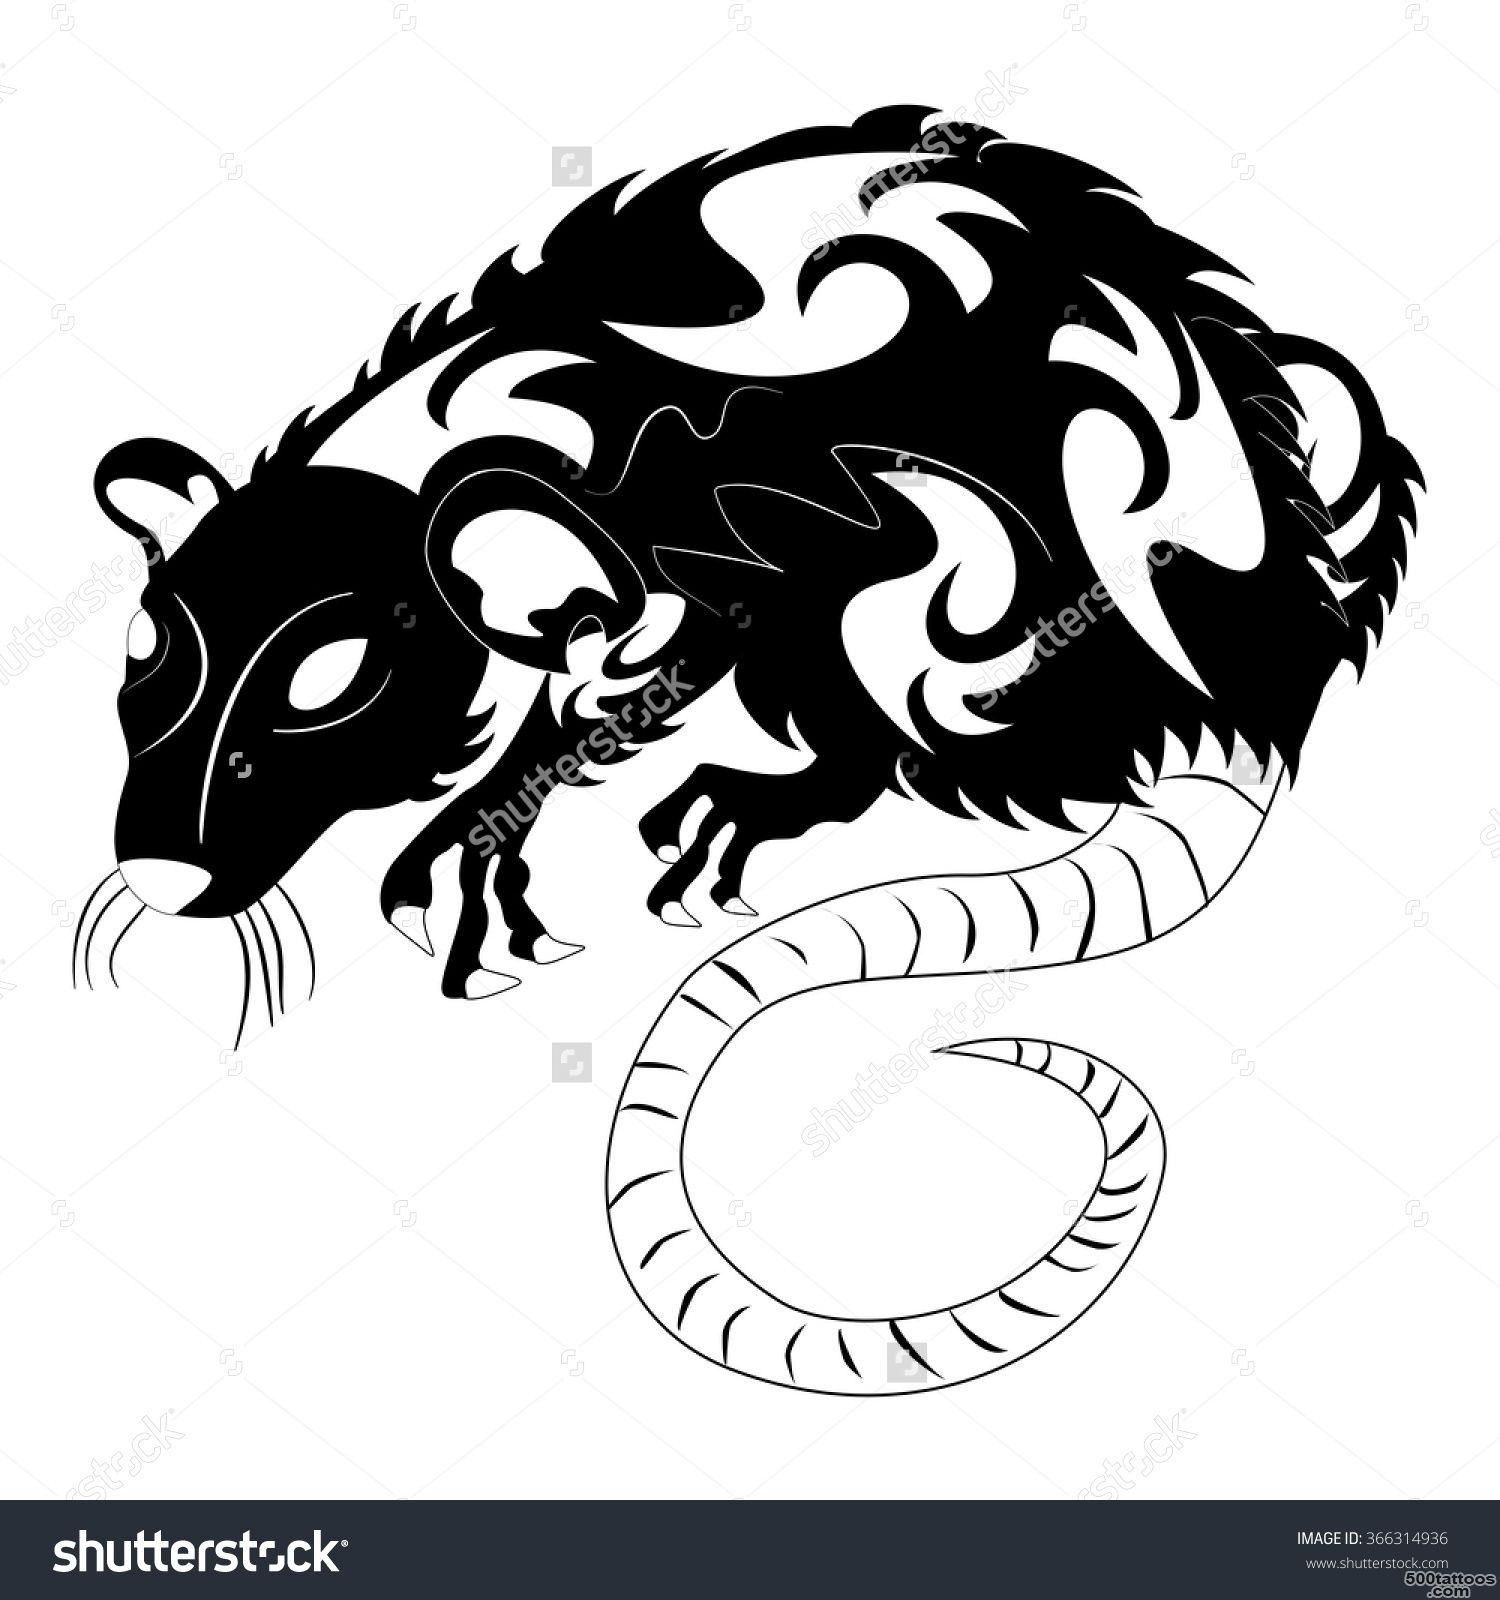 Rat Tattoo Stock Photos, Images, amp Pictures  Shutterstock_37